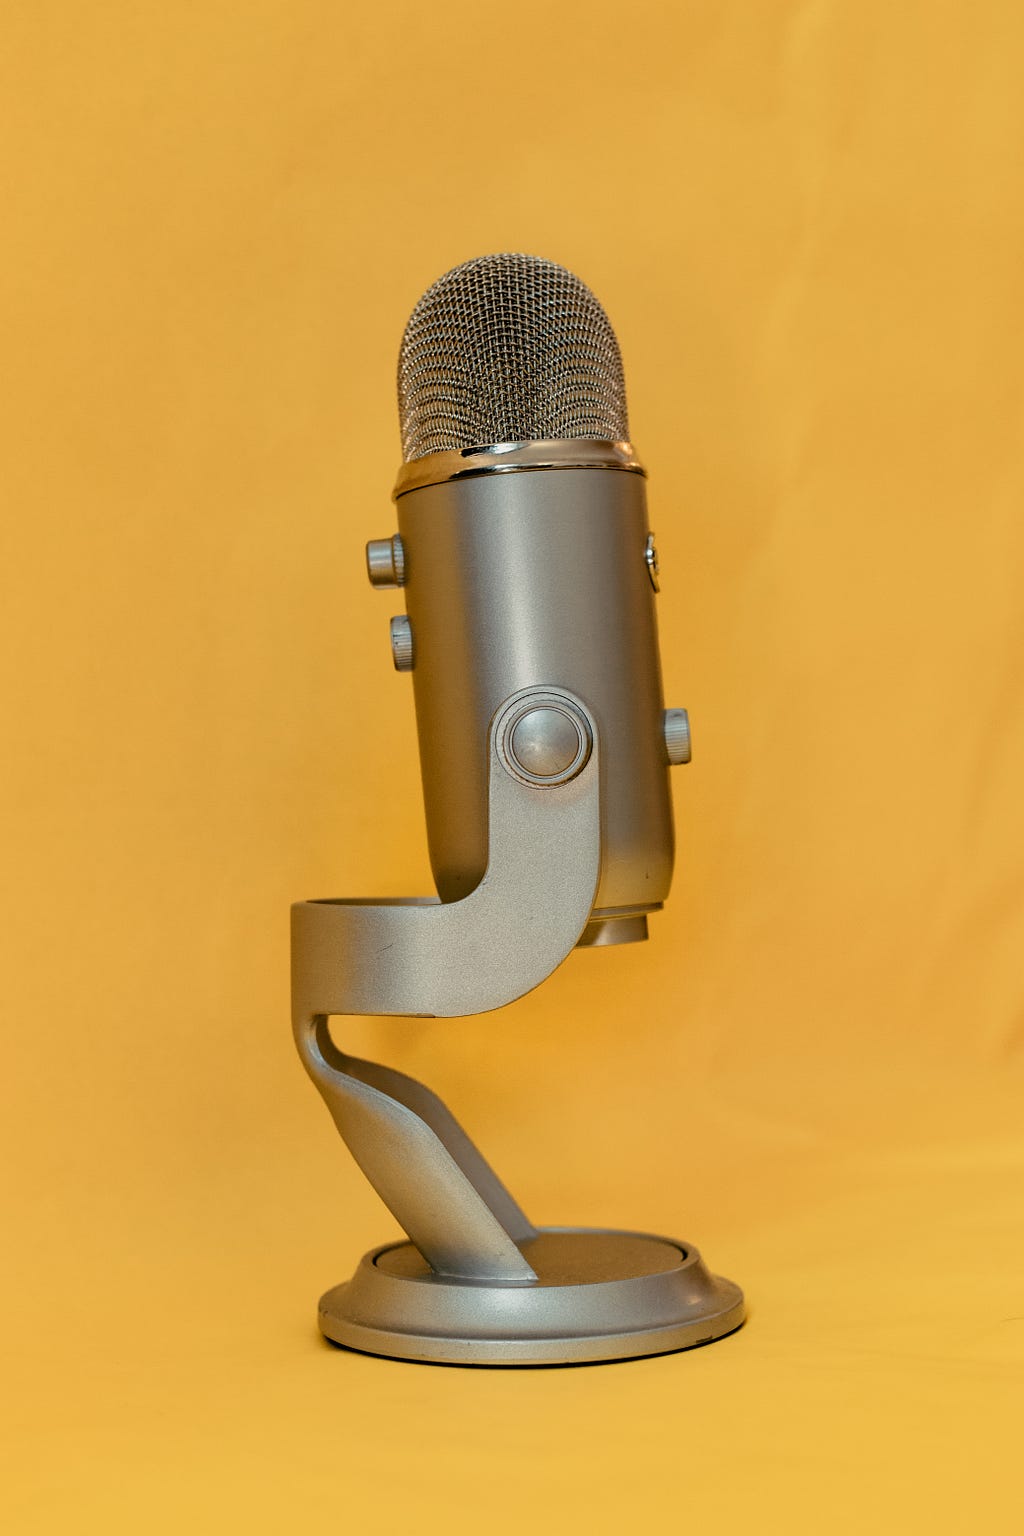 A blue Yeti microphone, silver and standing upright, on a golden yellow background.